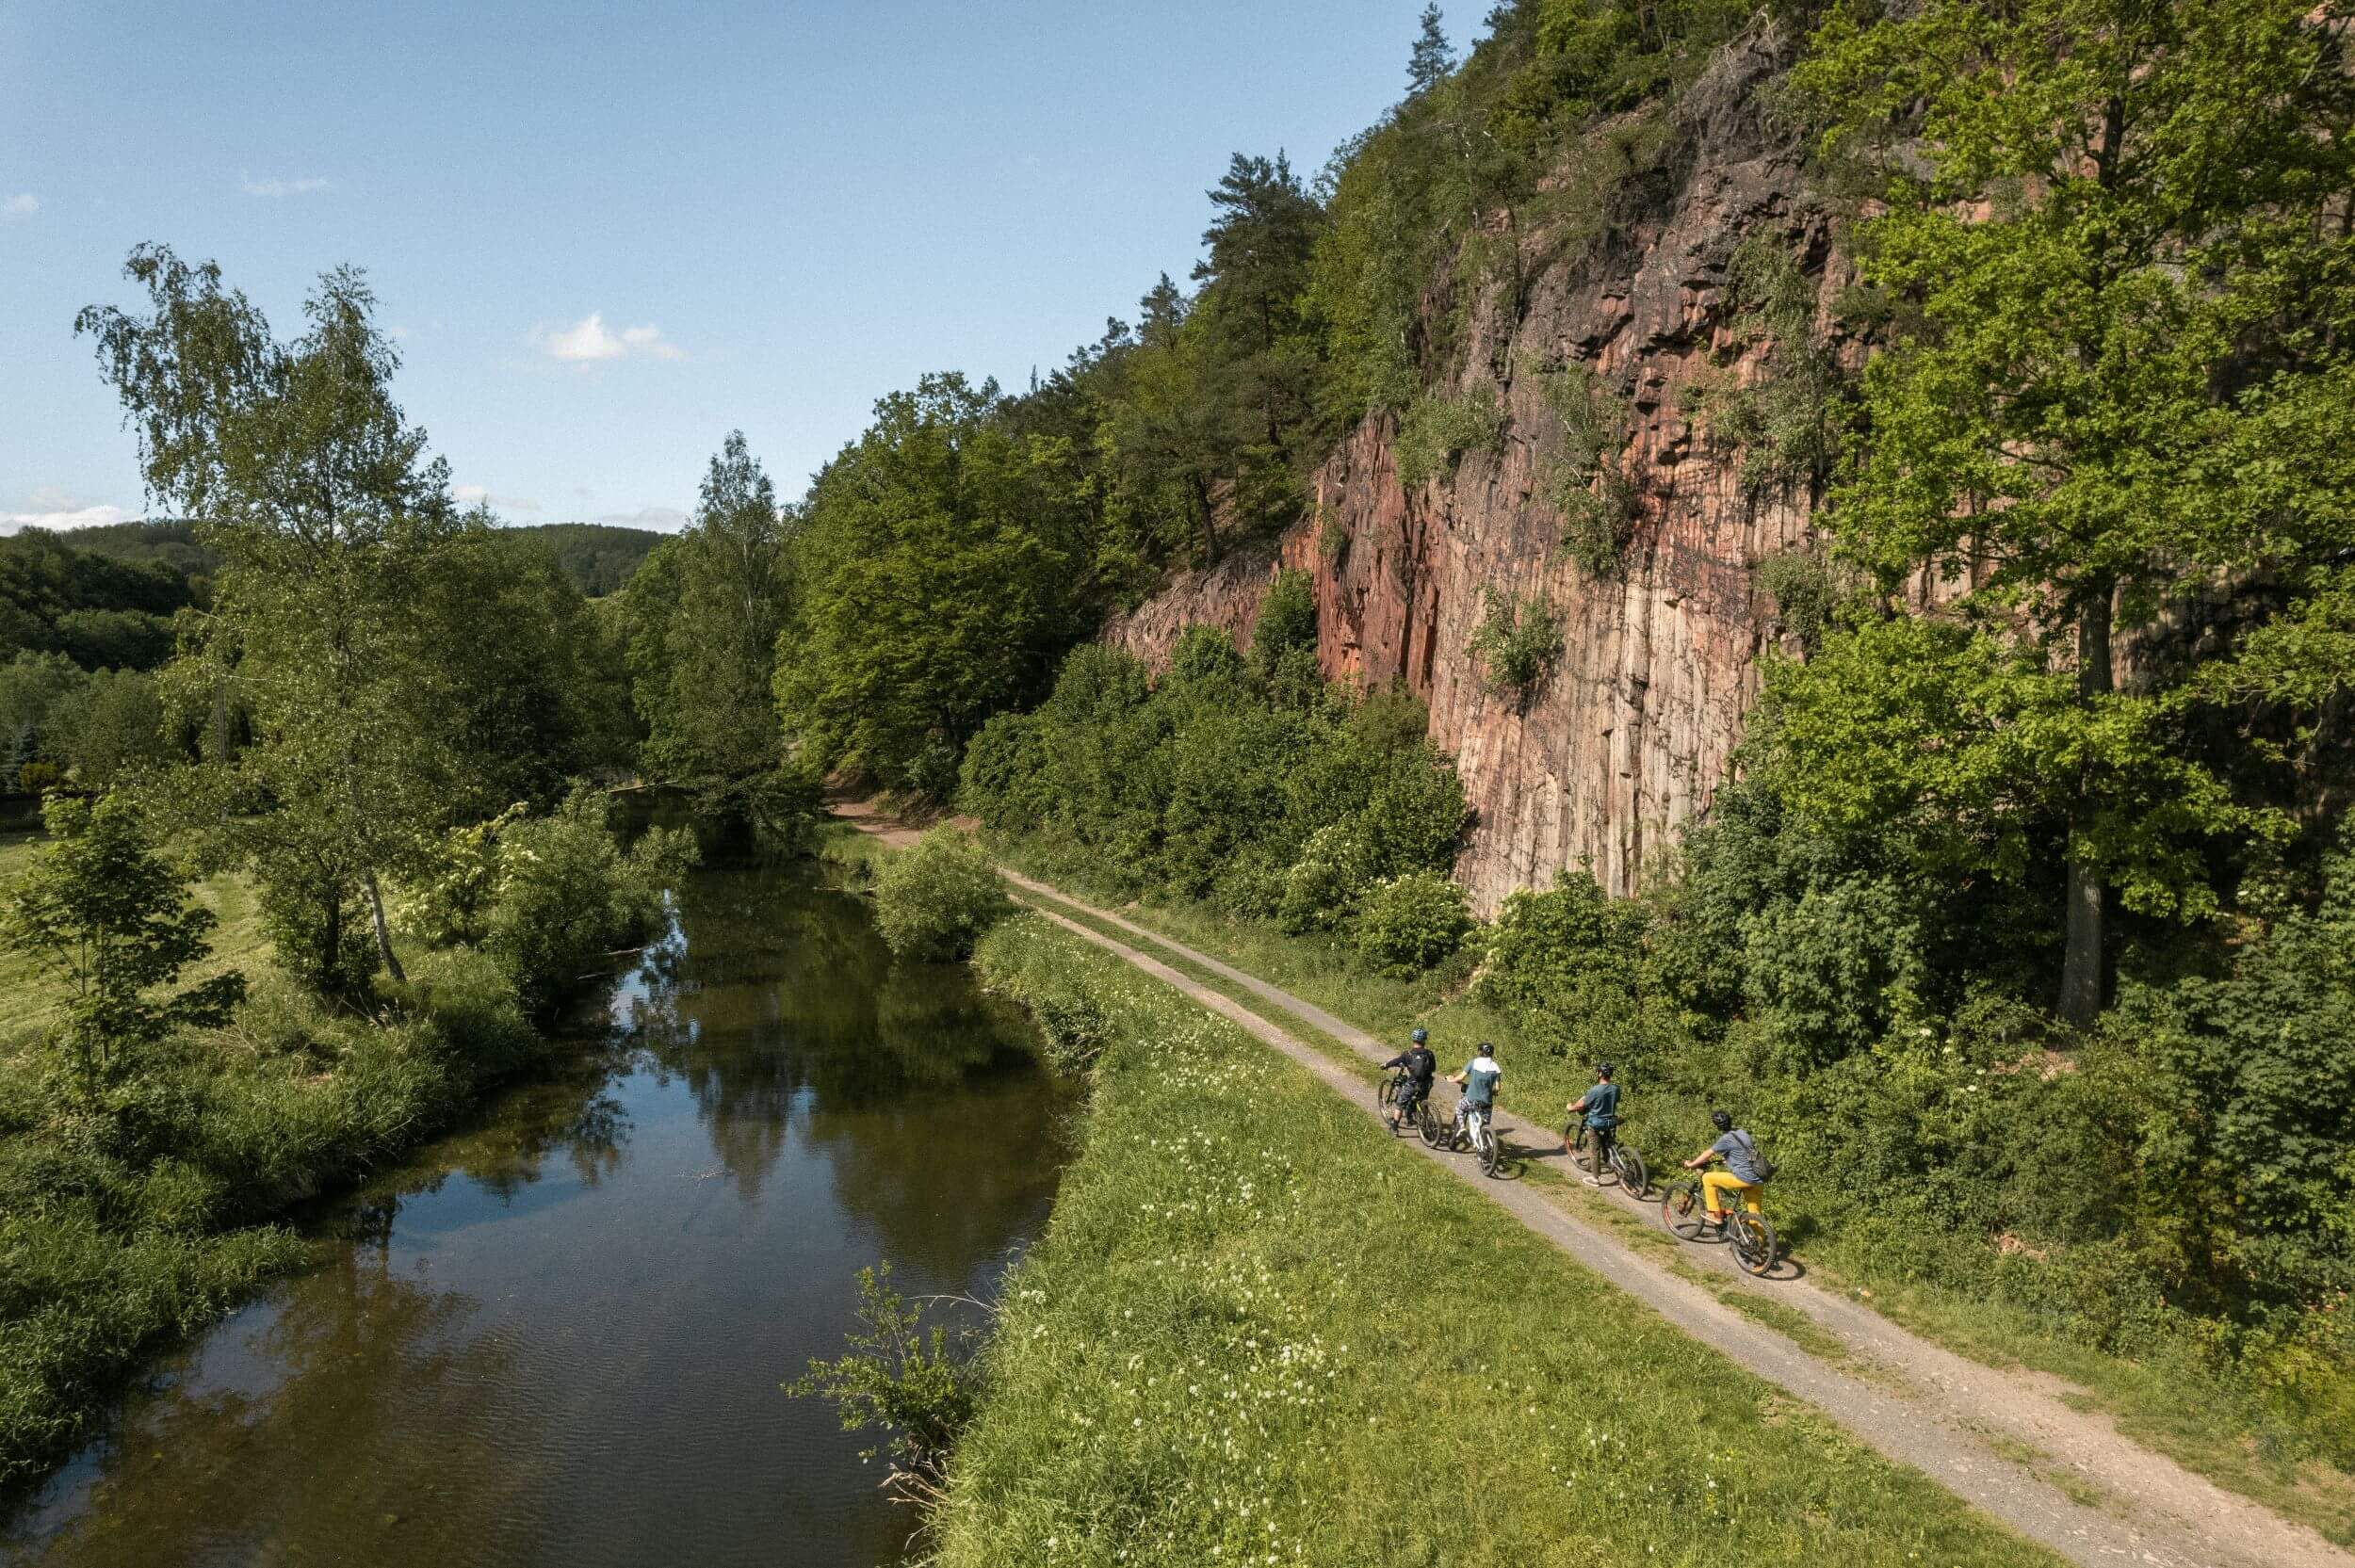 Slow Cyclists riding along a river in a gorge in Lower Silesia, Poland.